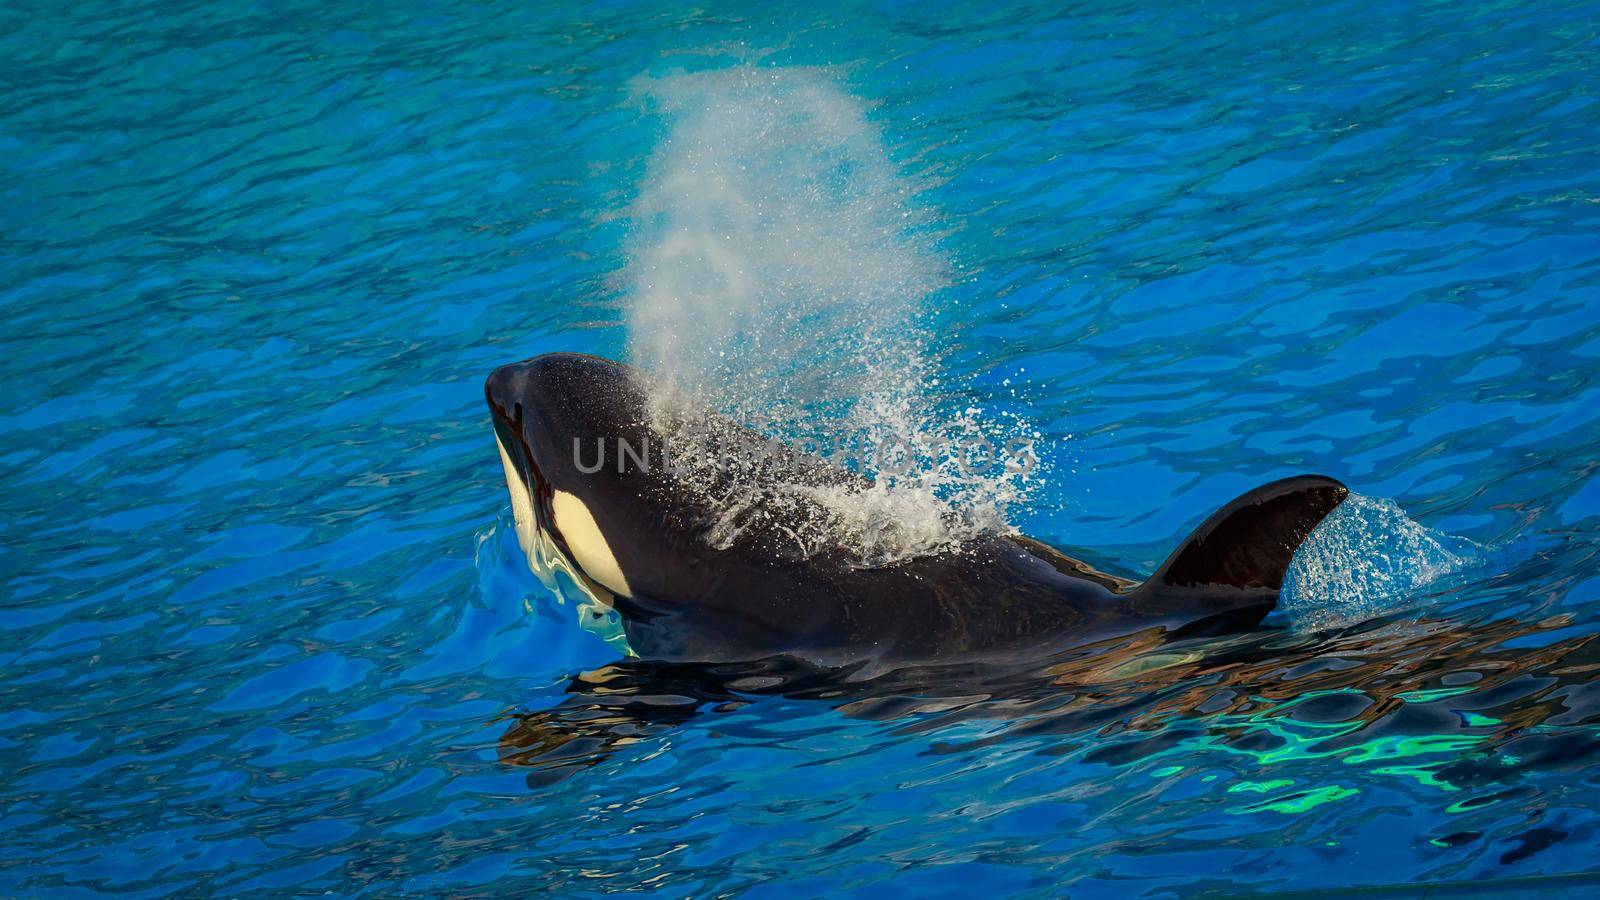 A killer whales  (Orca) plays in water.